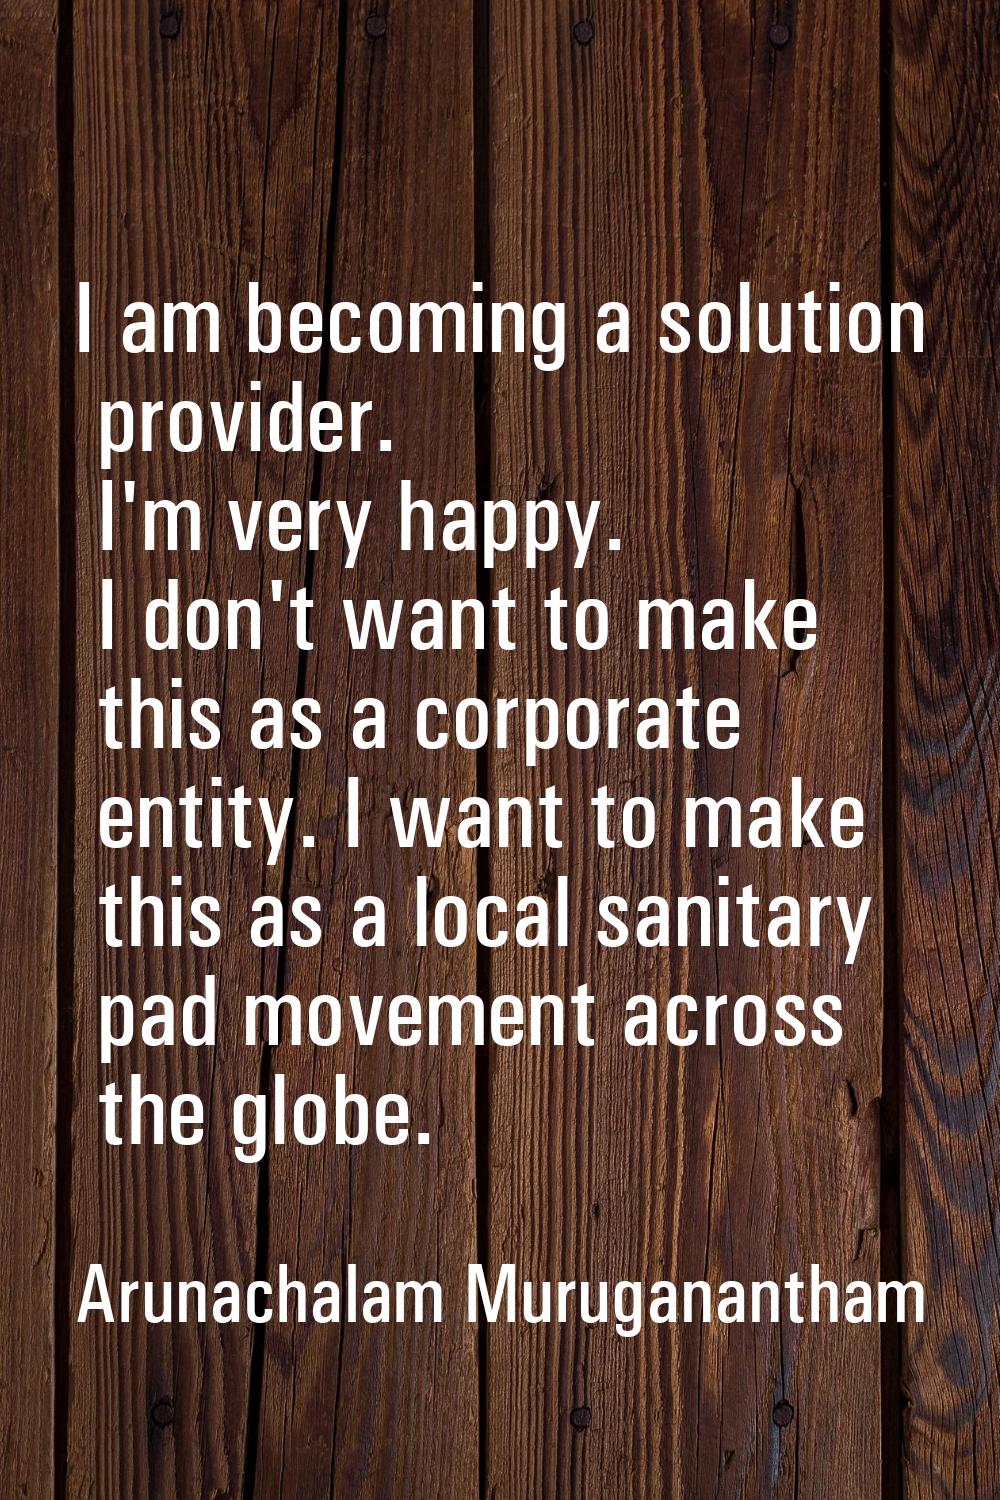 I am becoming a solution provider. I'm very happy. I don't want to make this as a corporate entity.